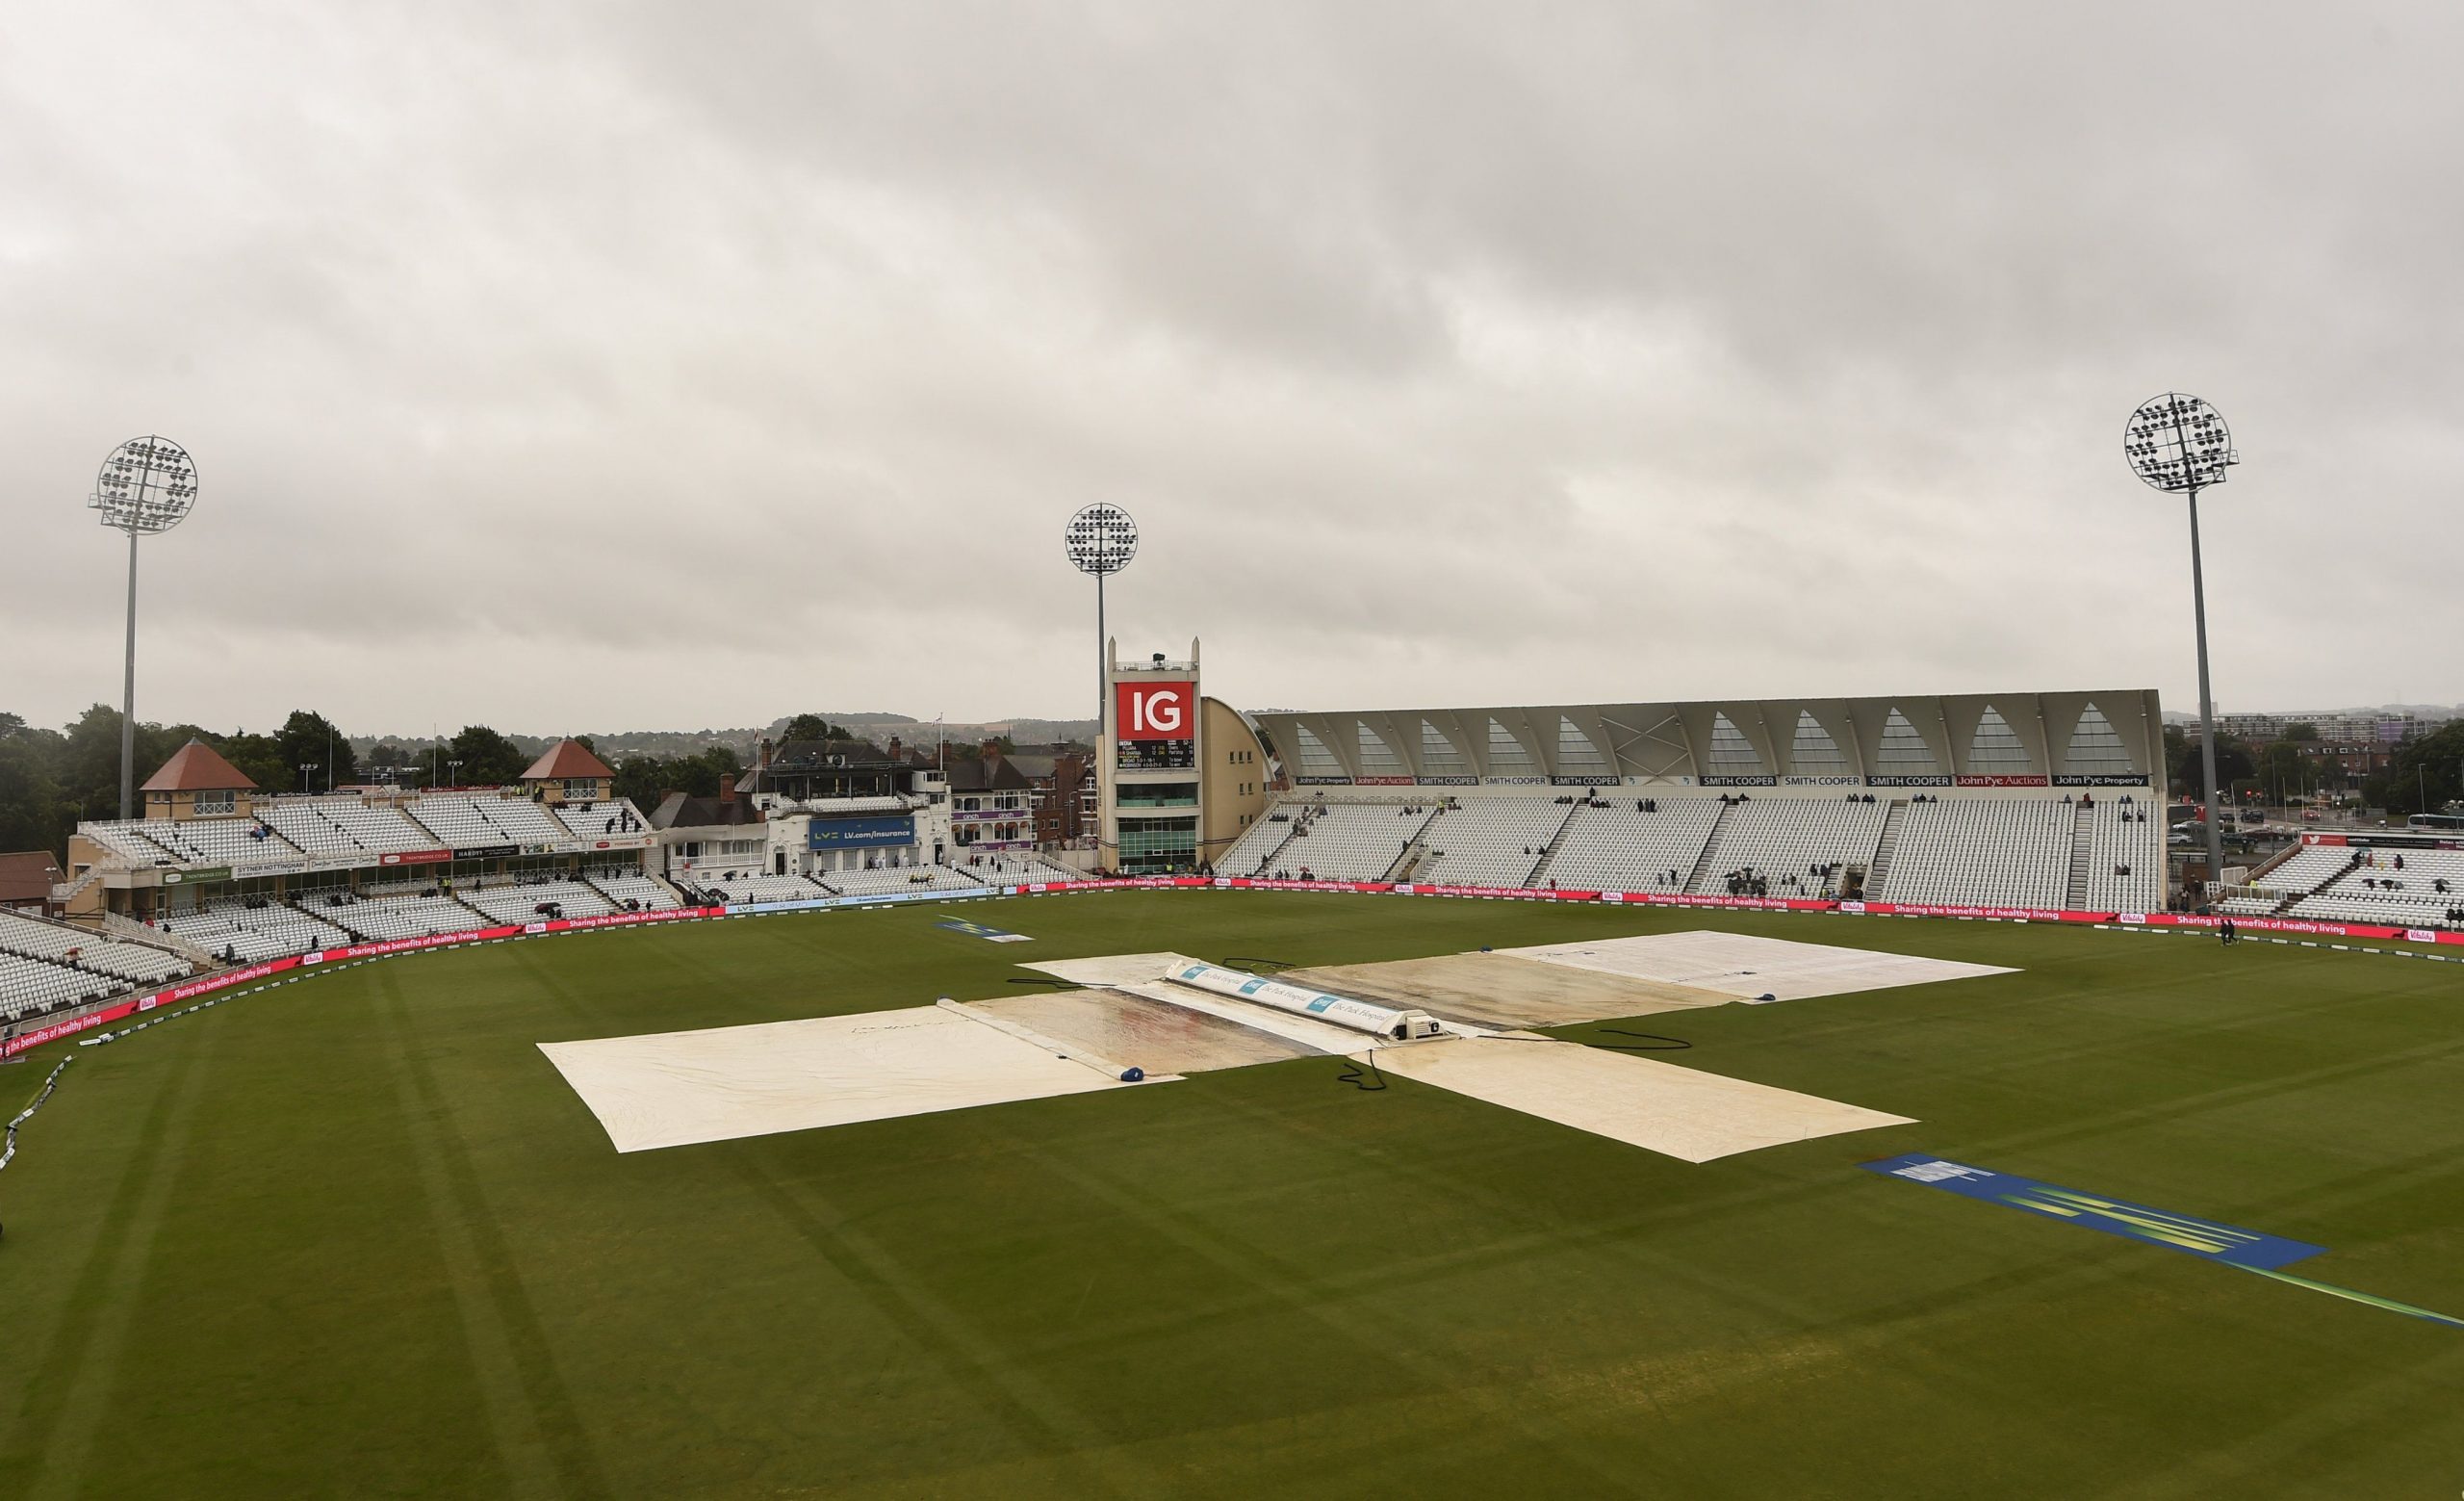 “Man of The Match-Rain”: Twitter Reacts As Day 5 Of First Test Gets Abandoned, Match Ends In a Draw